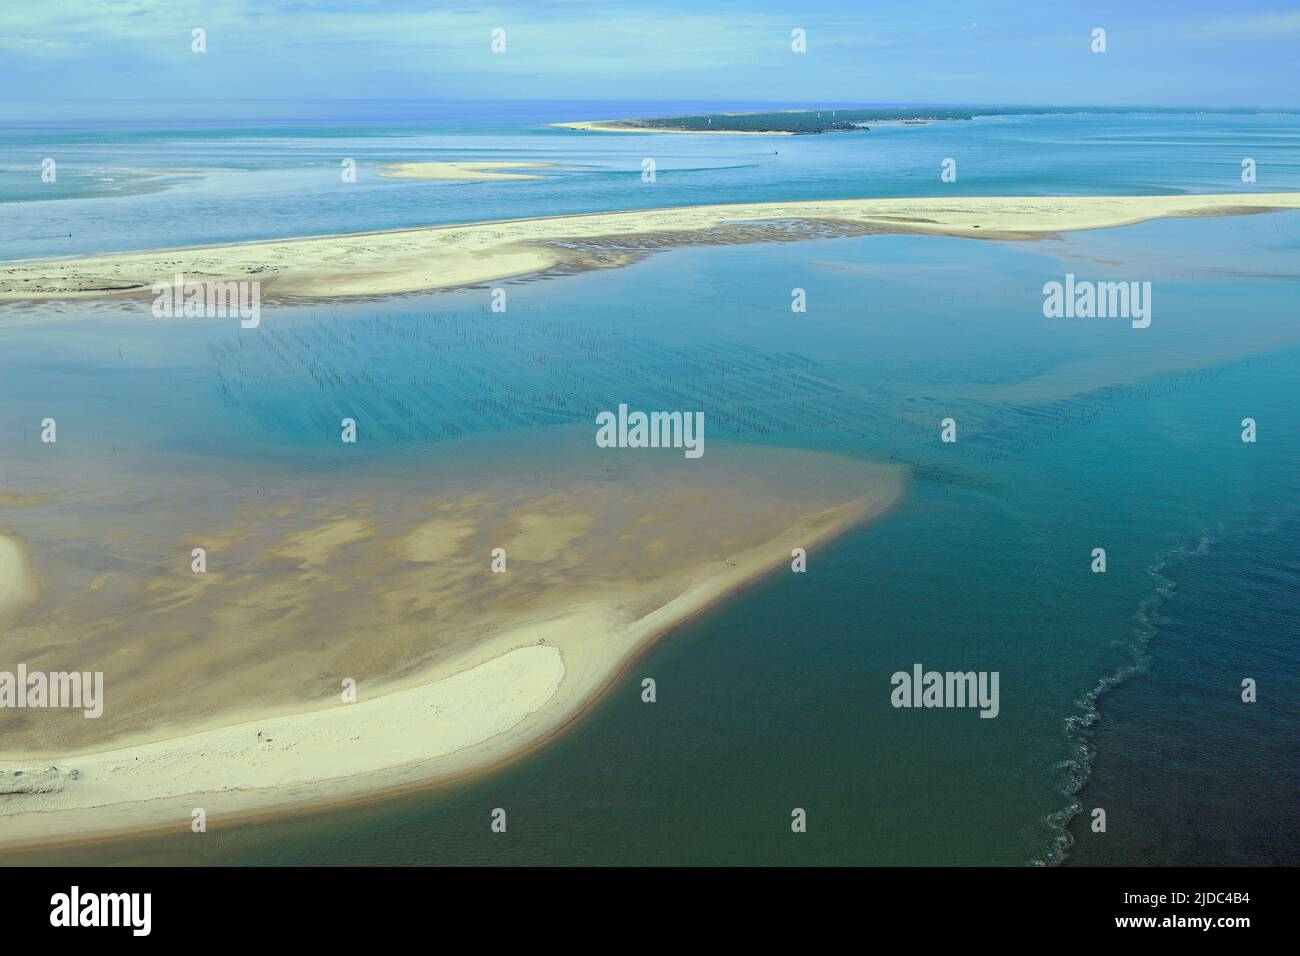 France, Gironde, the Banc d'Arguin and Cap Ferret, (aerial photo), Stock Photo